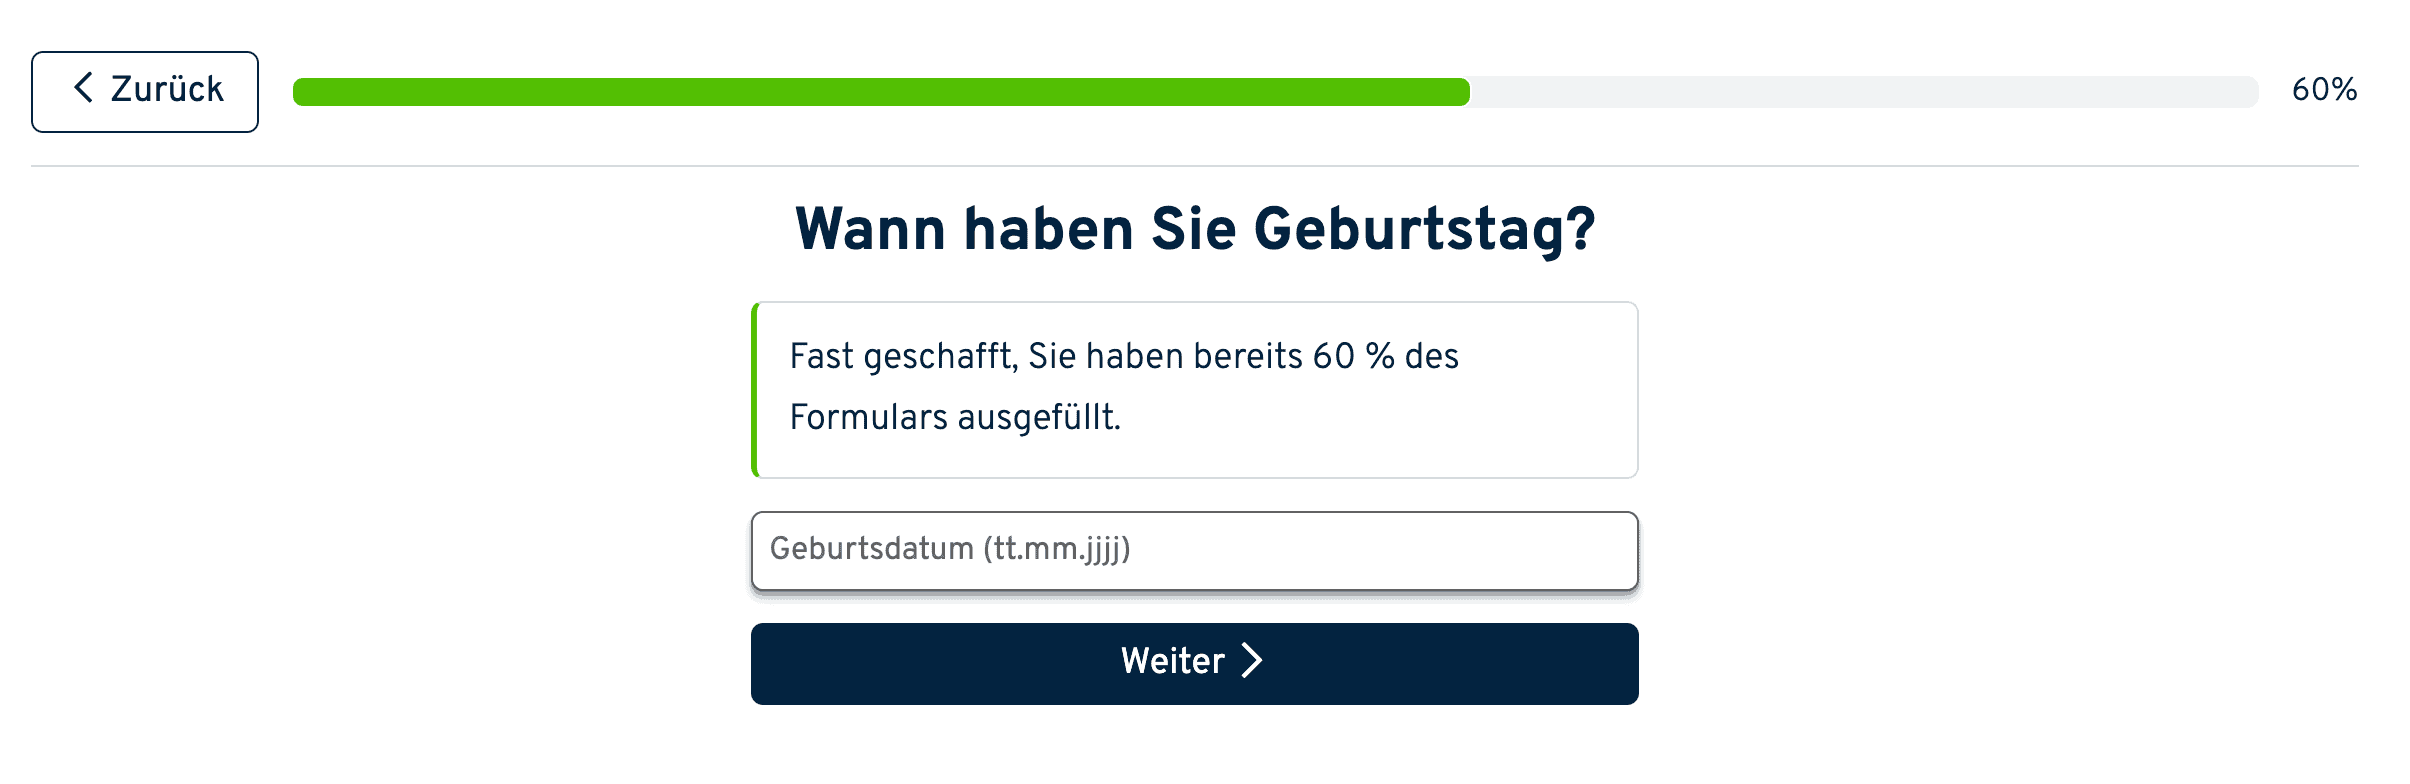 Tariff24 screenshot on how to apply student private health insurance Germany